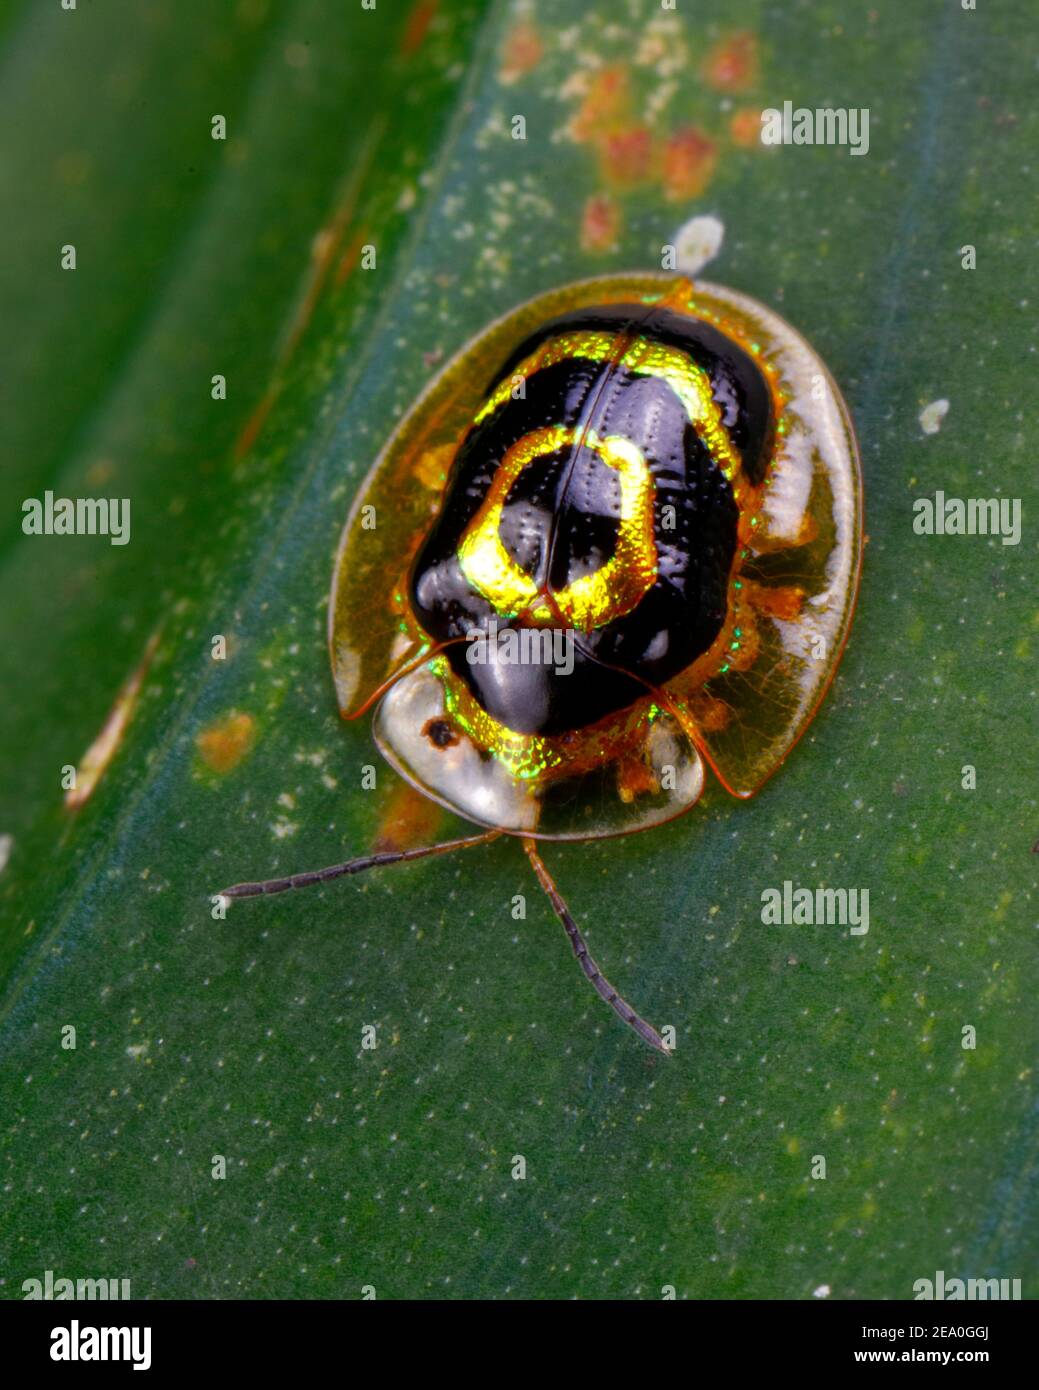 A Target Tortoise Beetle, Ischnocodia annulus, crawling on a leaf. Stock Photo